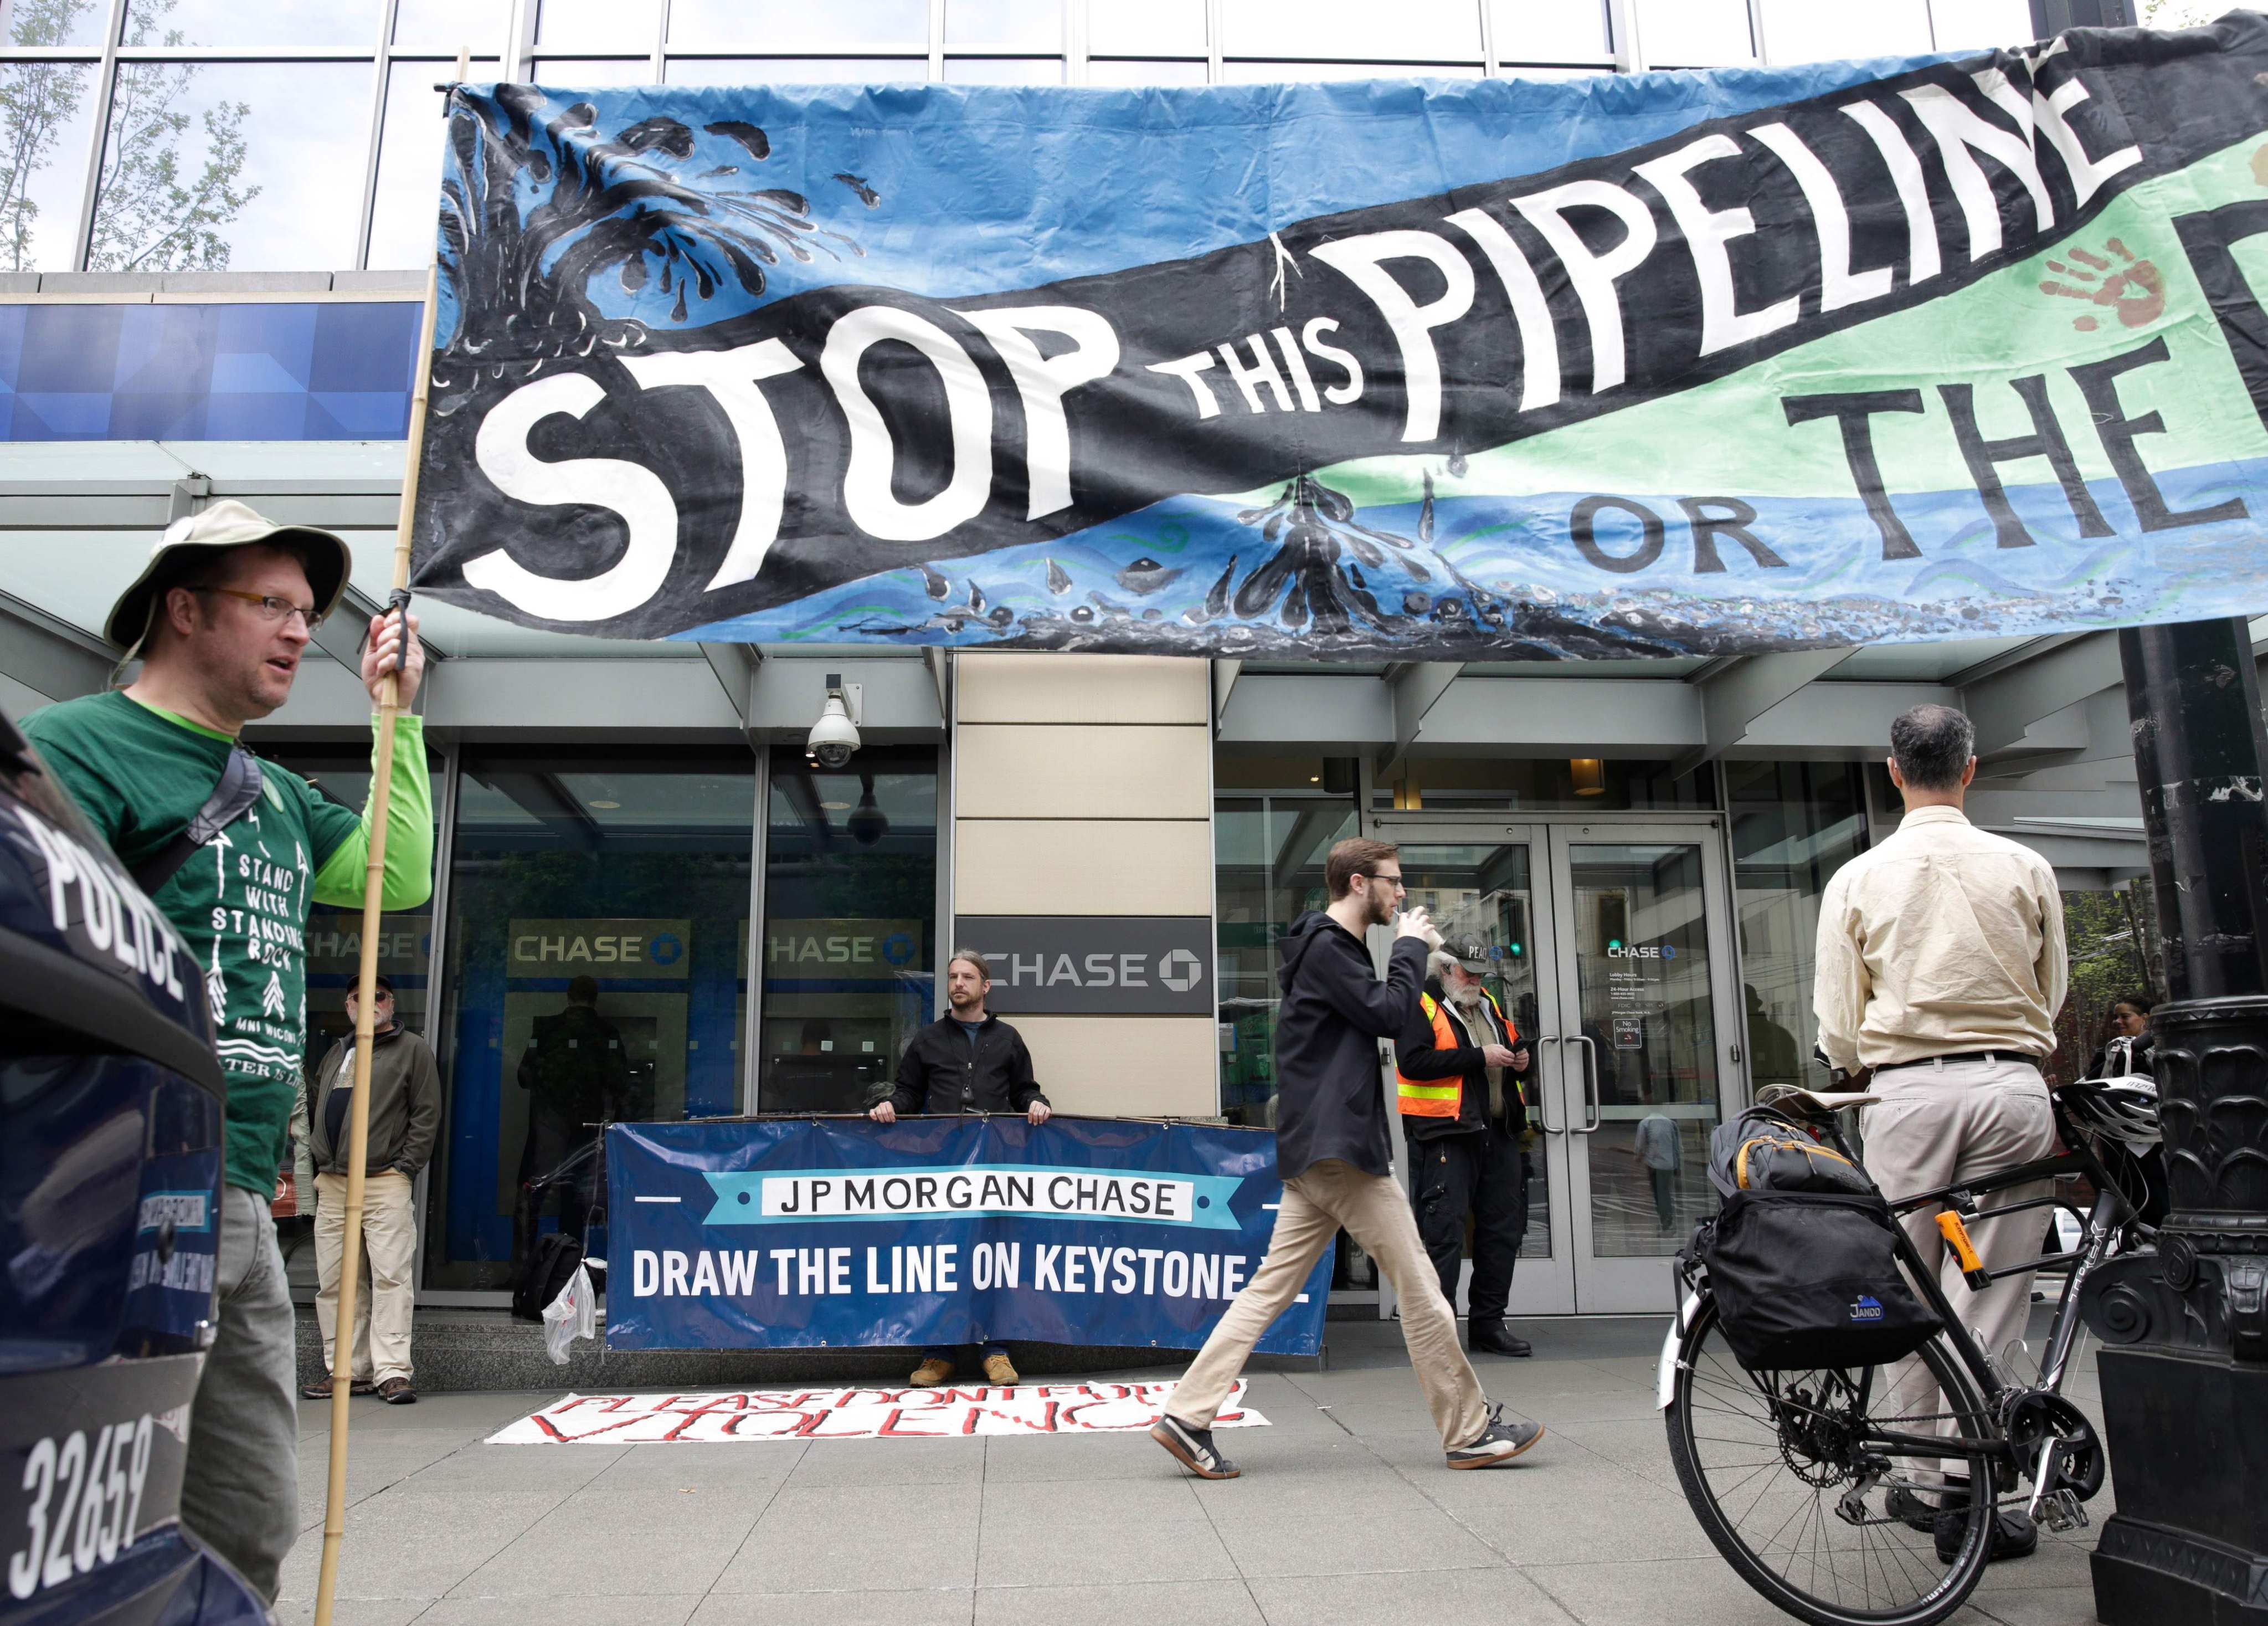 Indigenous leaders and climate activists protest against the Keystone XL oil pipeline in Seattle on May 8, 2017. Biden has revoked the project’s permit as he pursues climate-friendly policies to meet the demands of the Democratic Party’s Green New Deal base. Photo: AFP